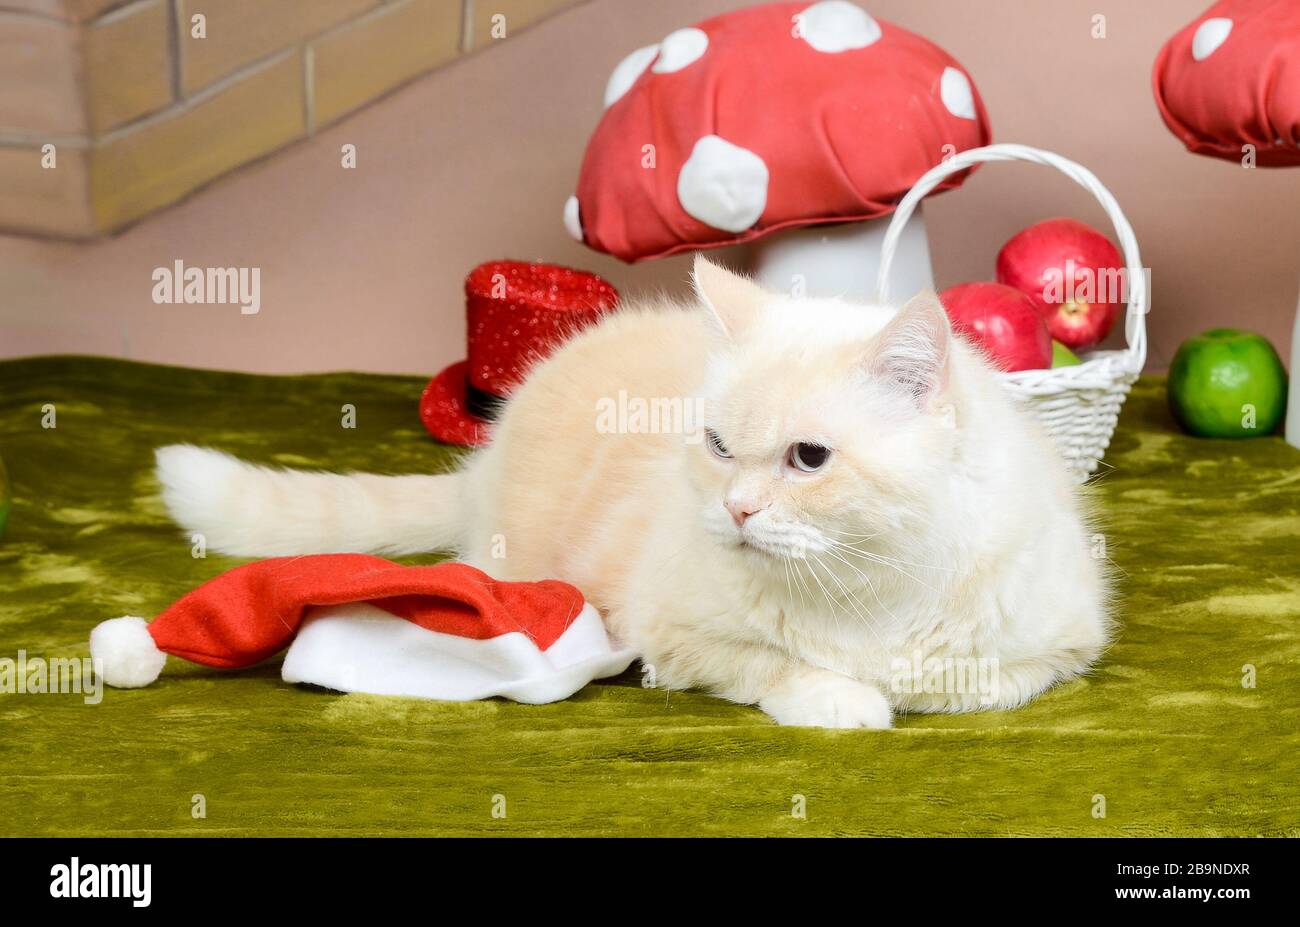 white cat with brown stripes lying next to christmas items Stock Photo